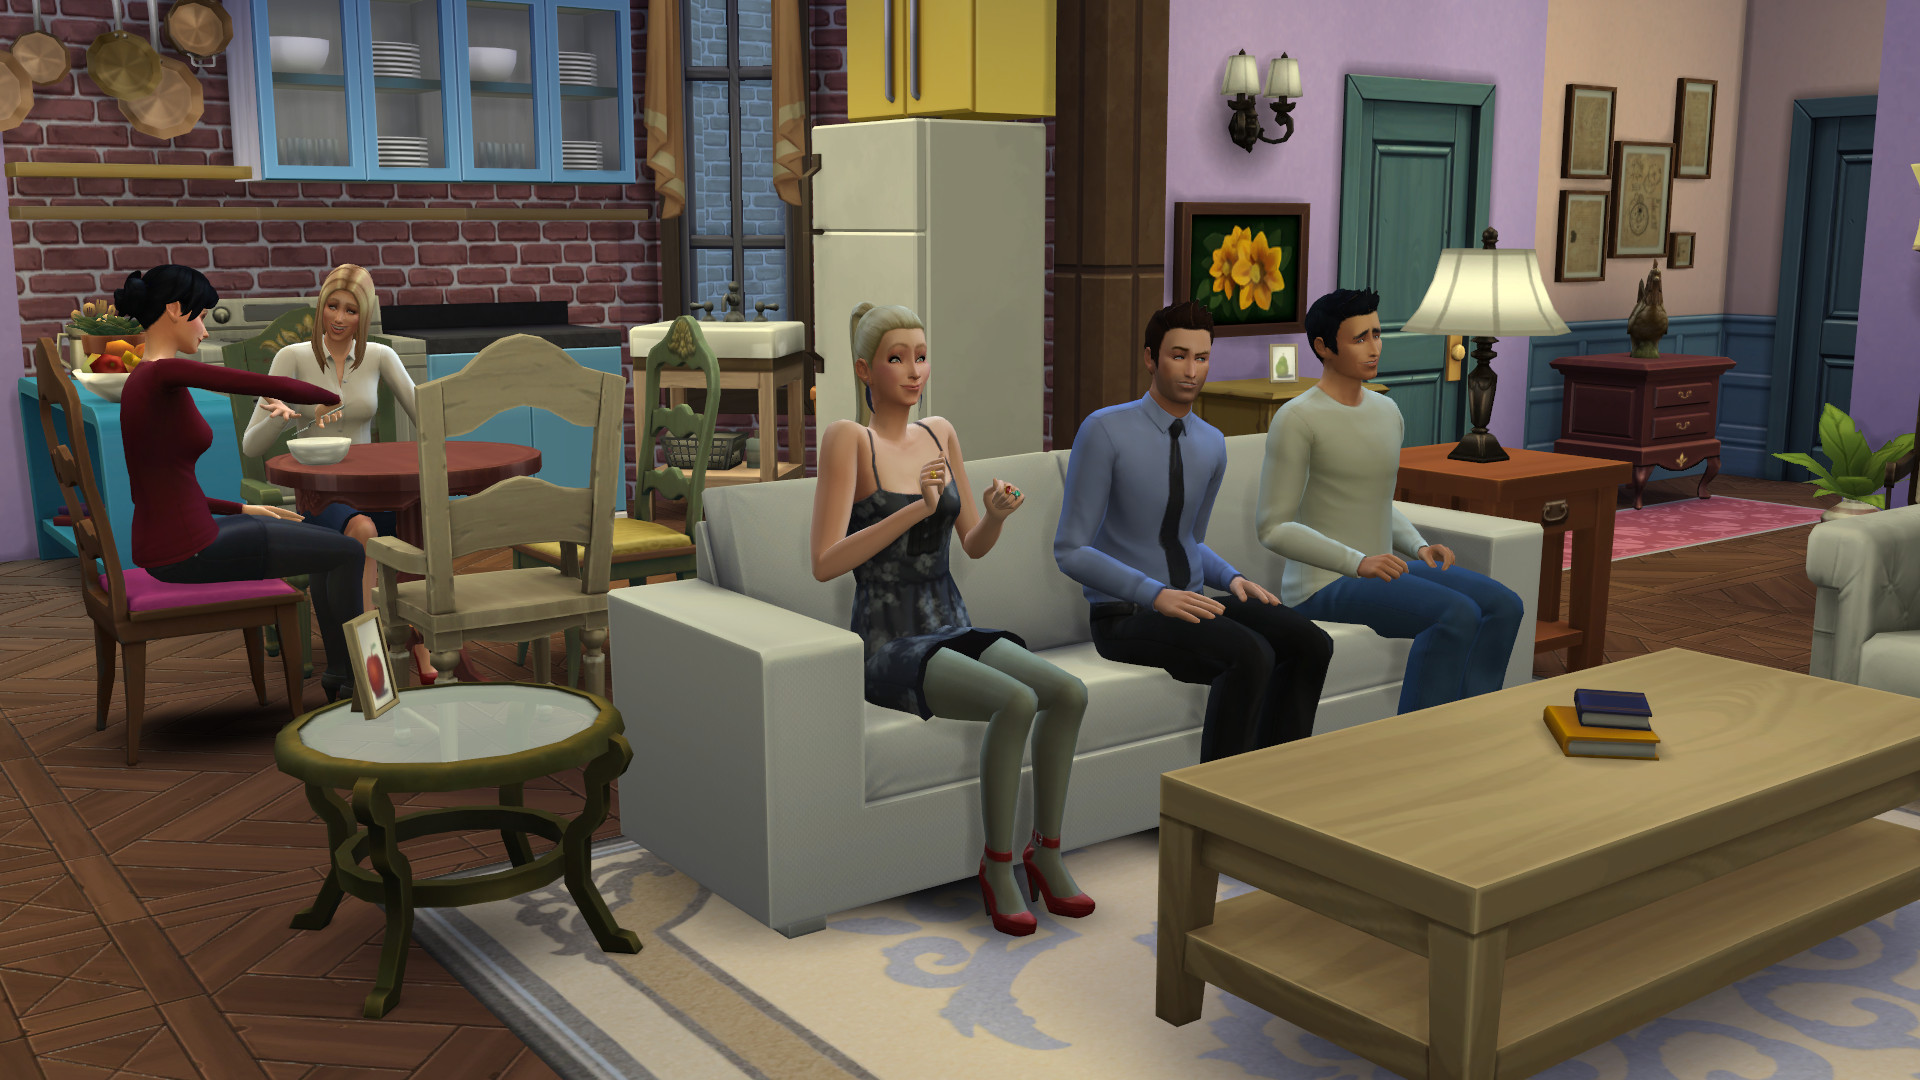 NBC's Must See TV lives on in 'The Sims 4' - The Verge